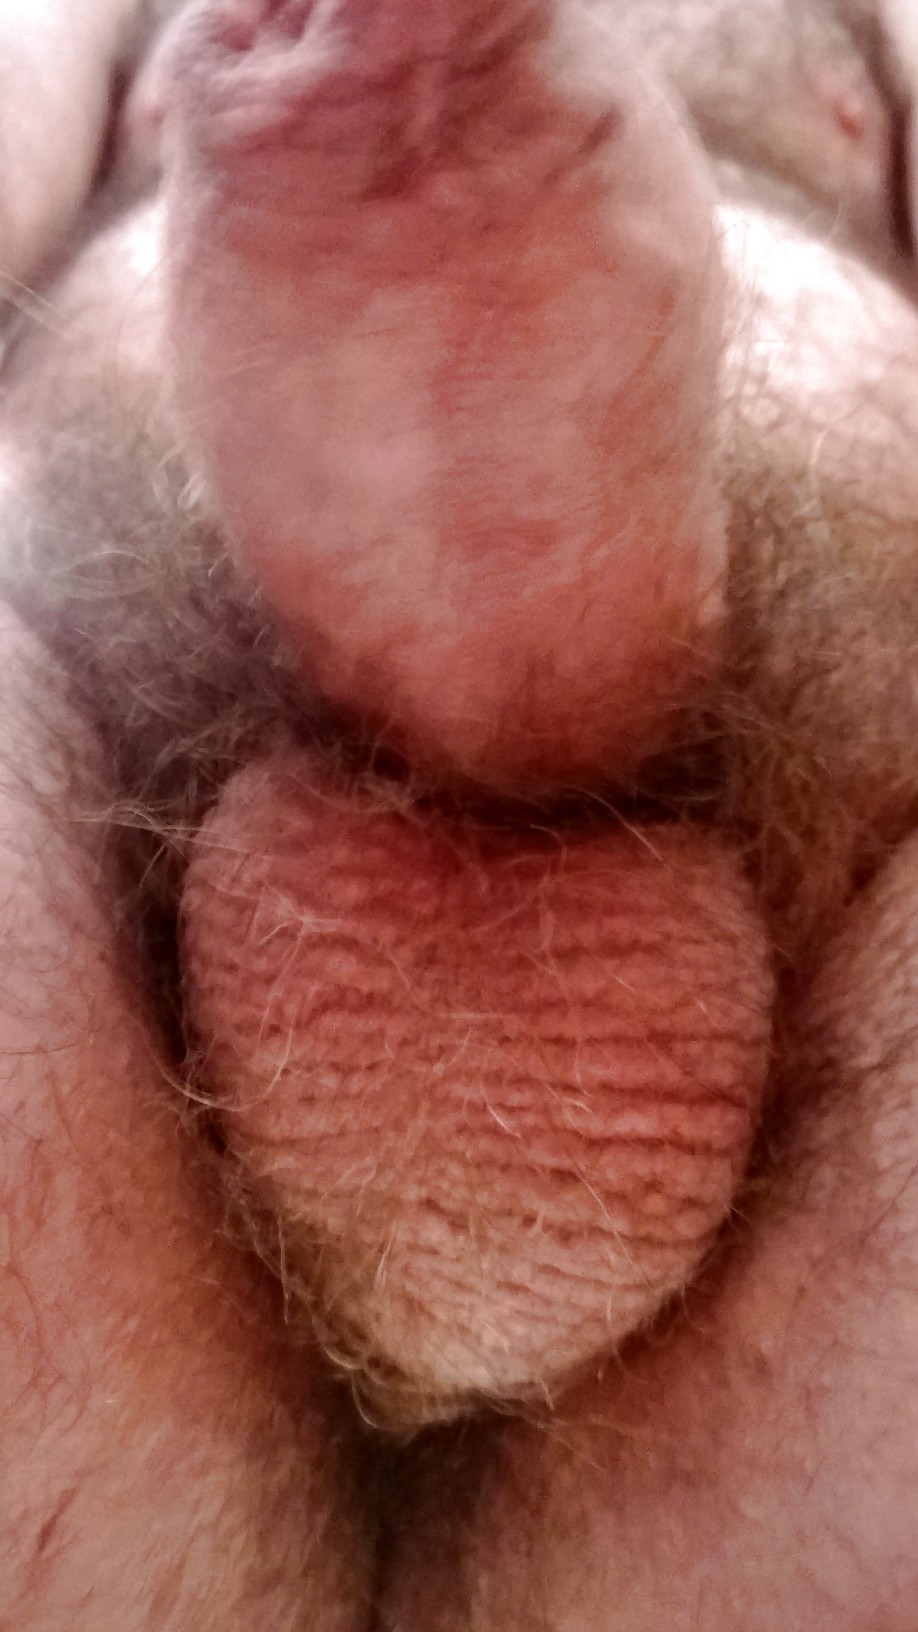 Porn image The cocksucker point of view (close up pics)